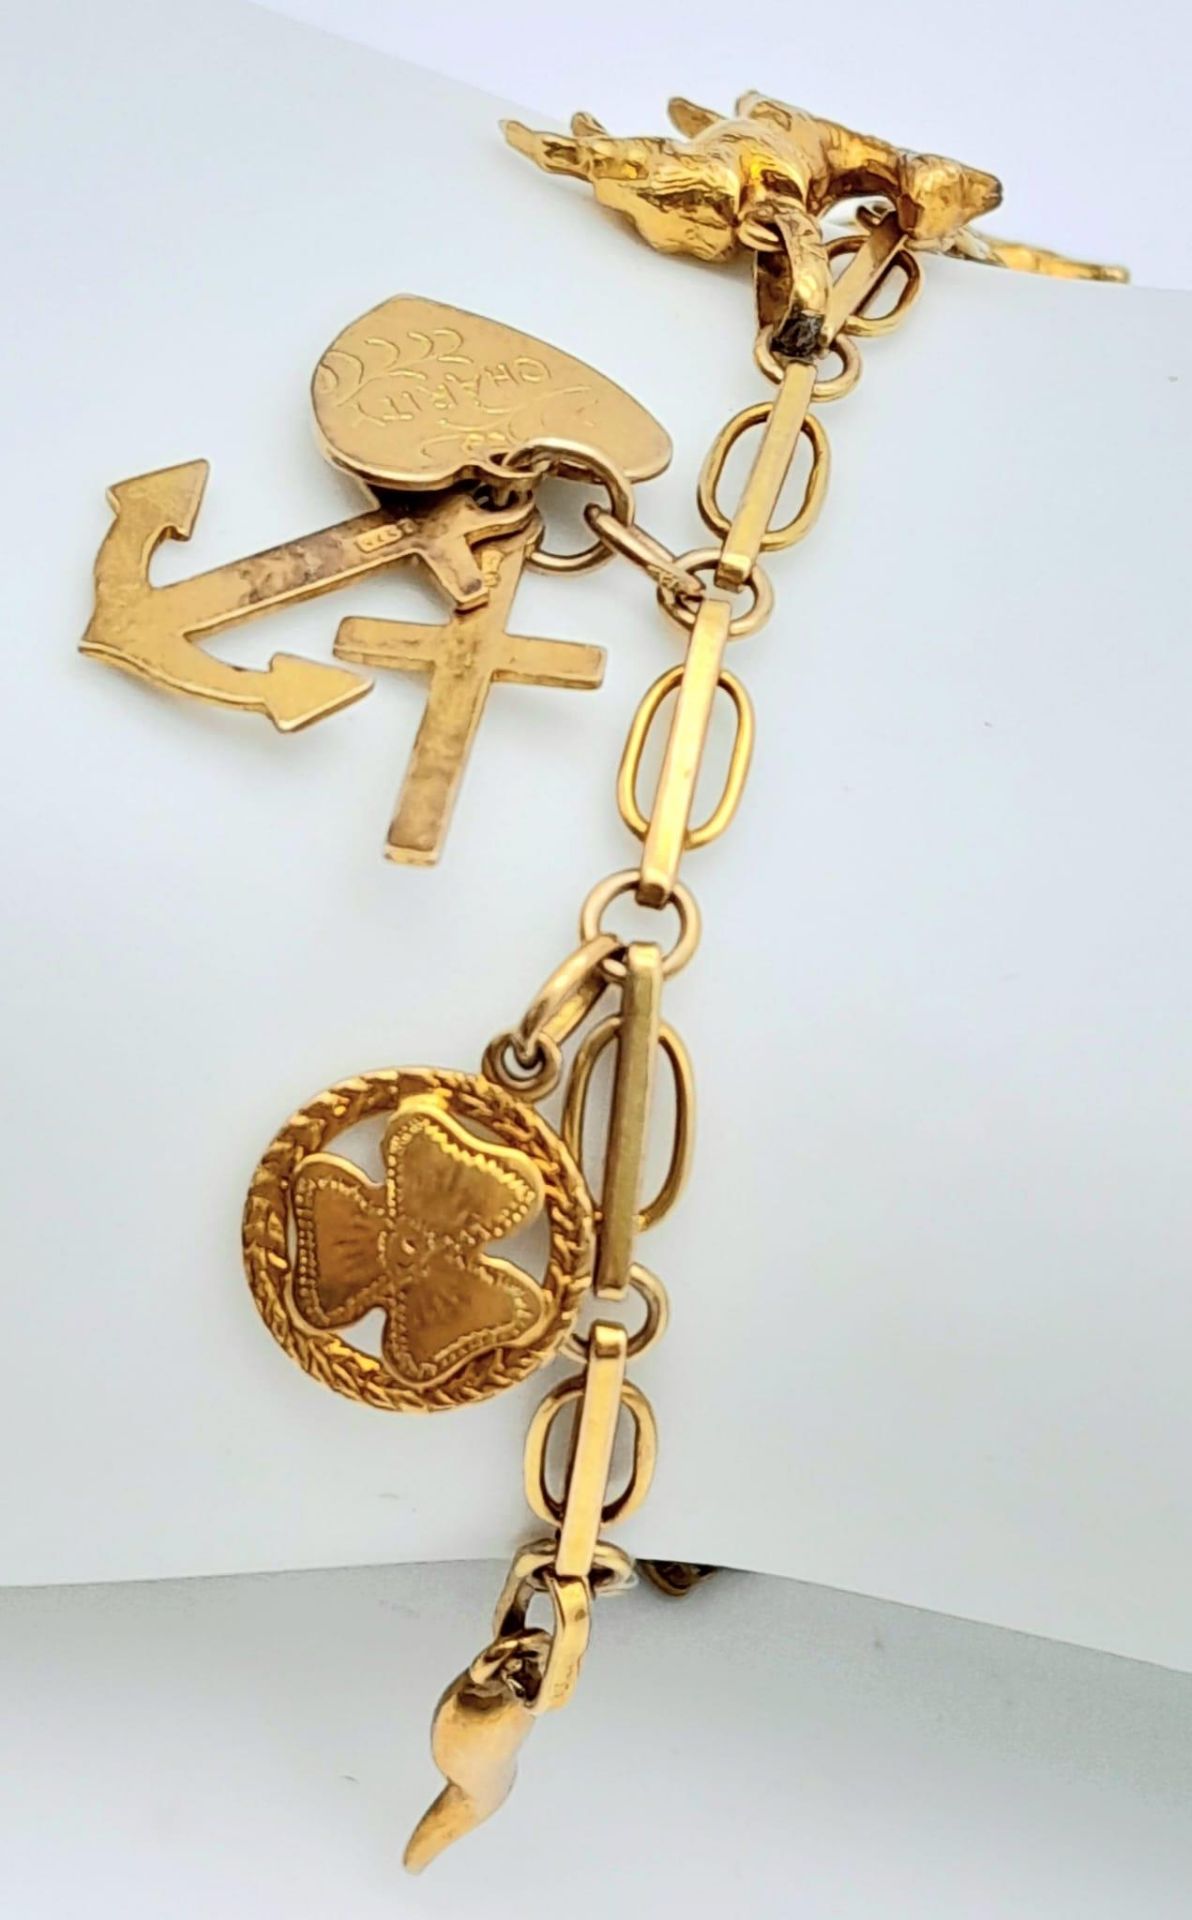 A 9K Yellow Gold Charm Bracelet. Eight charms including Elephant! 10.65g weight. - Image 5 of 6